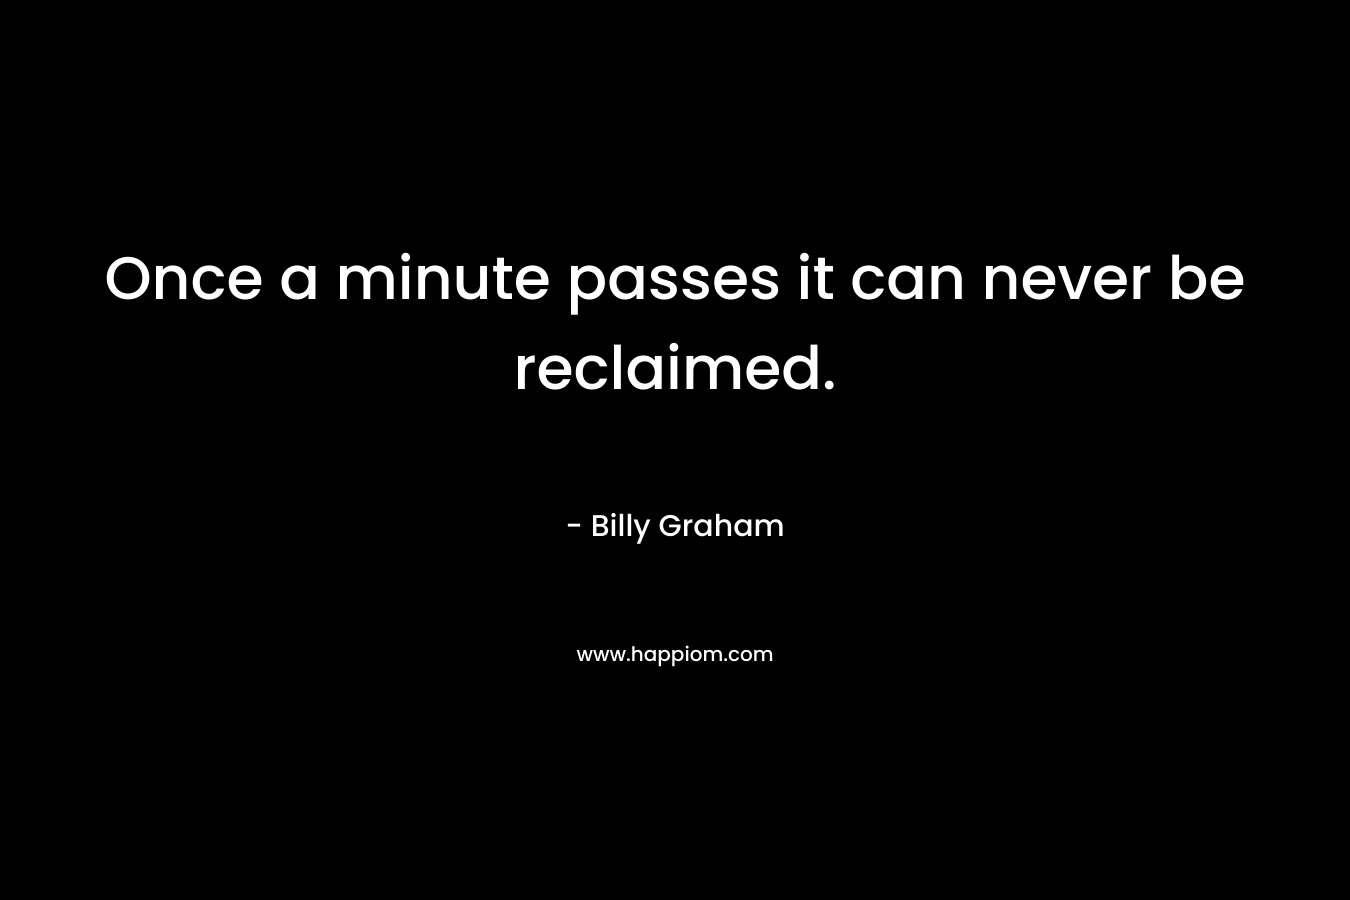 Once a minute passes it can never be reclaimed. – Billy Graham